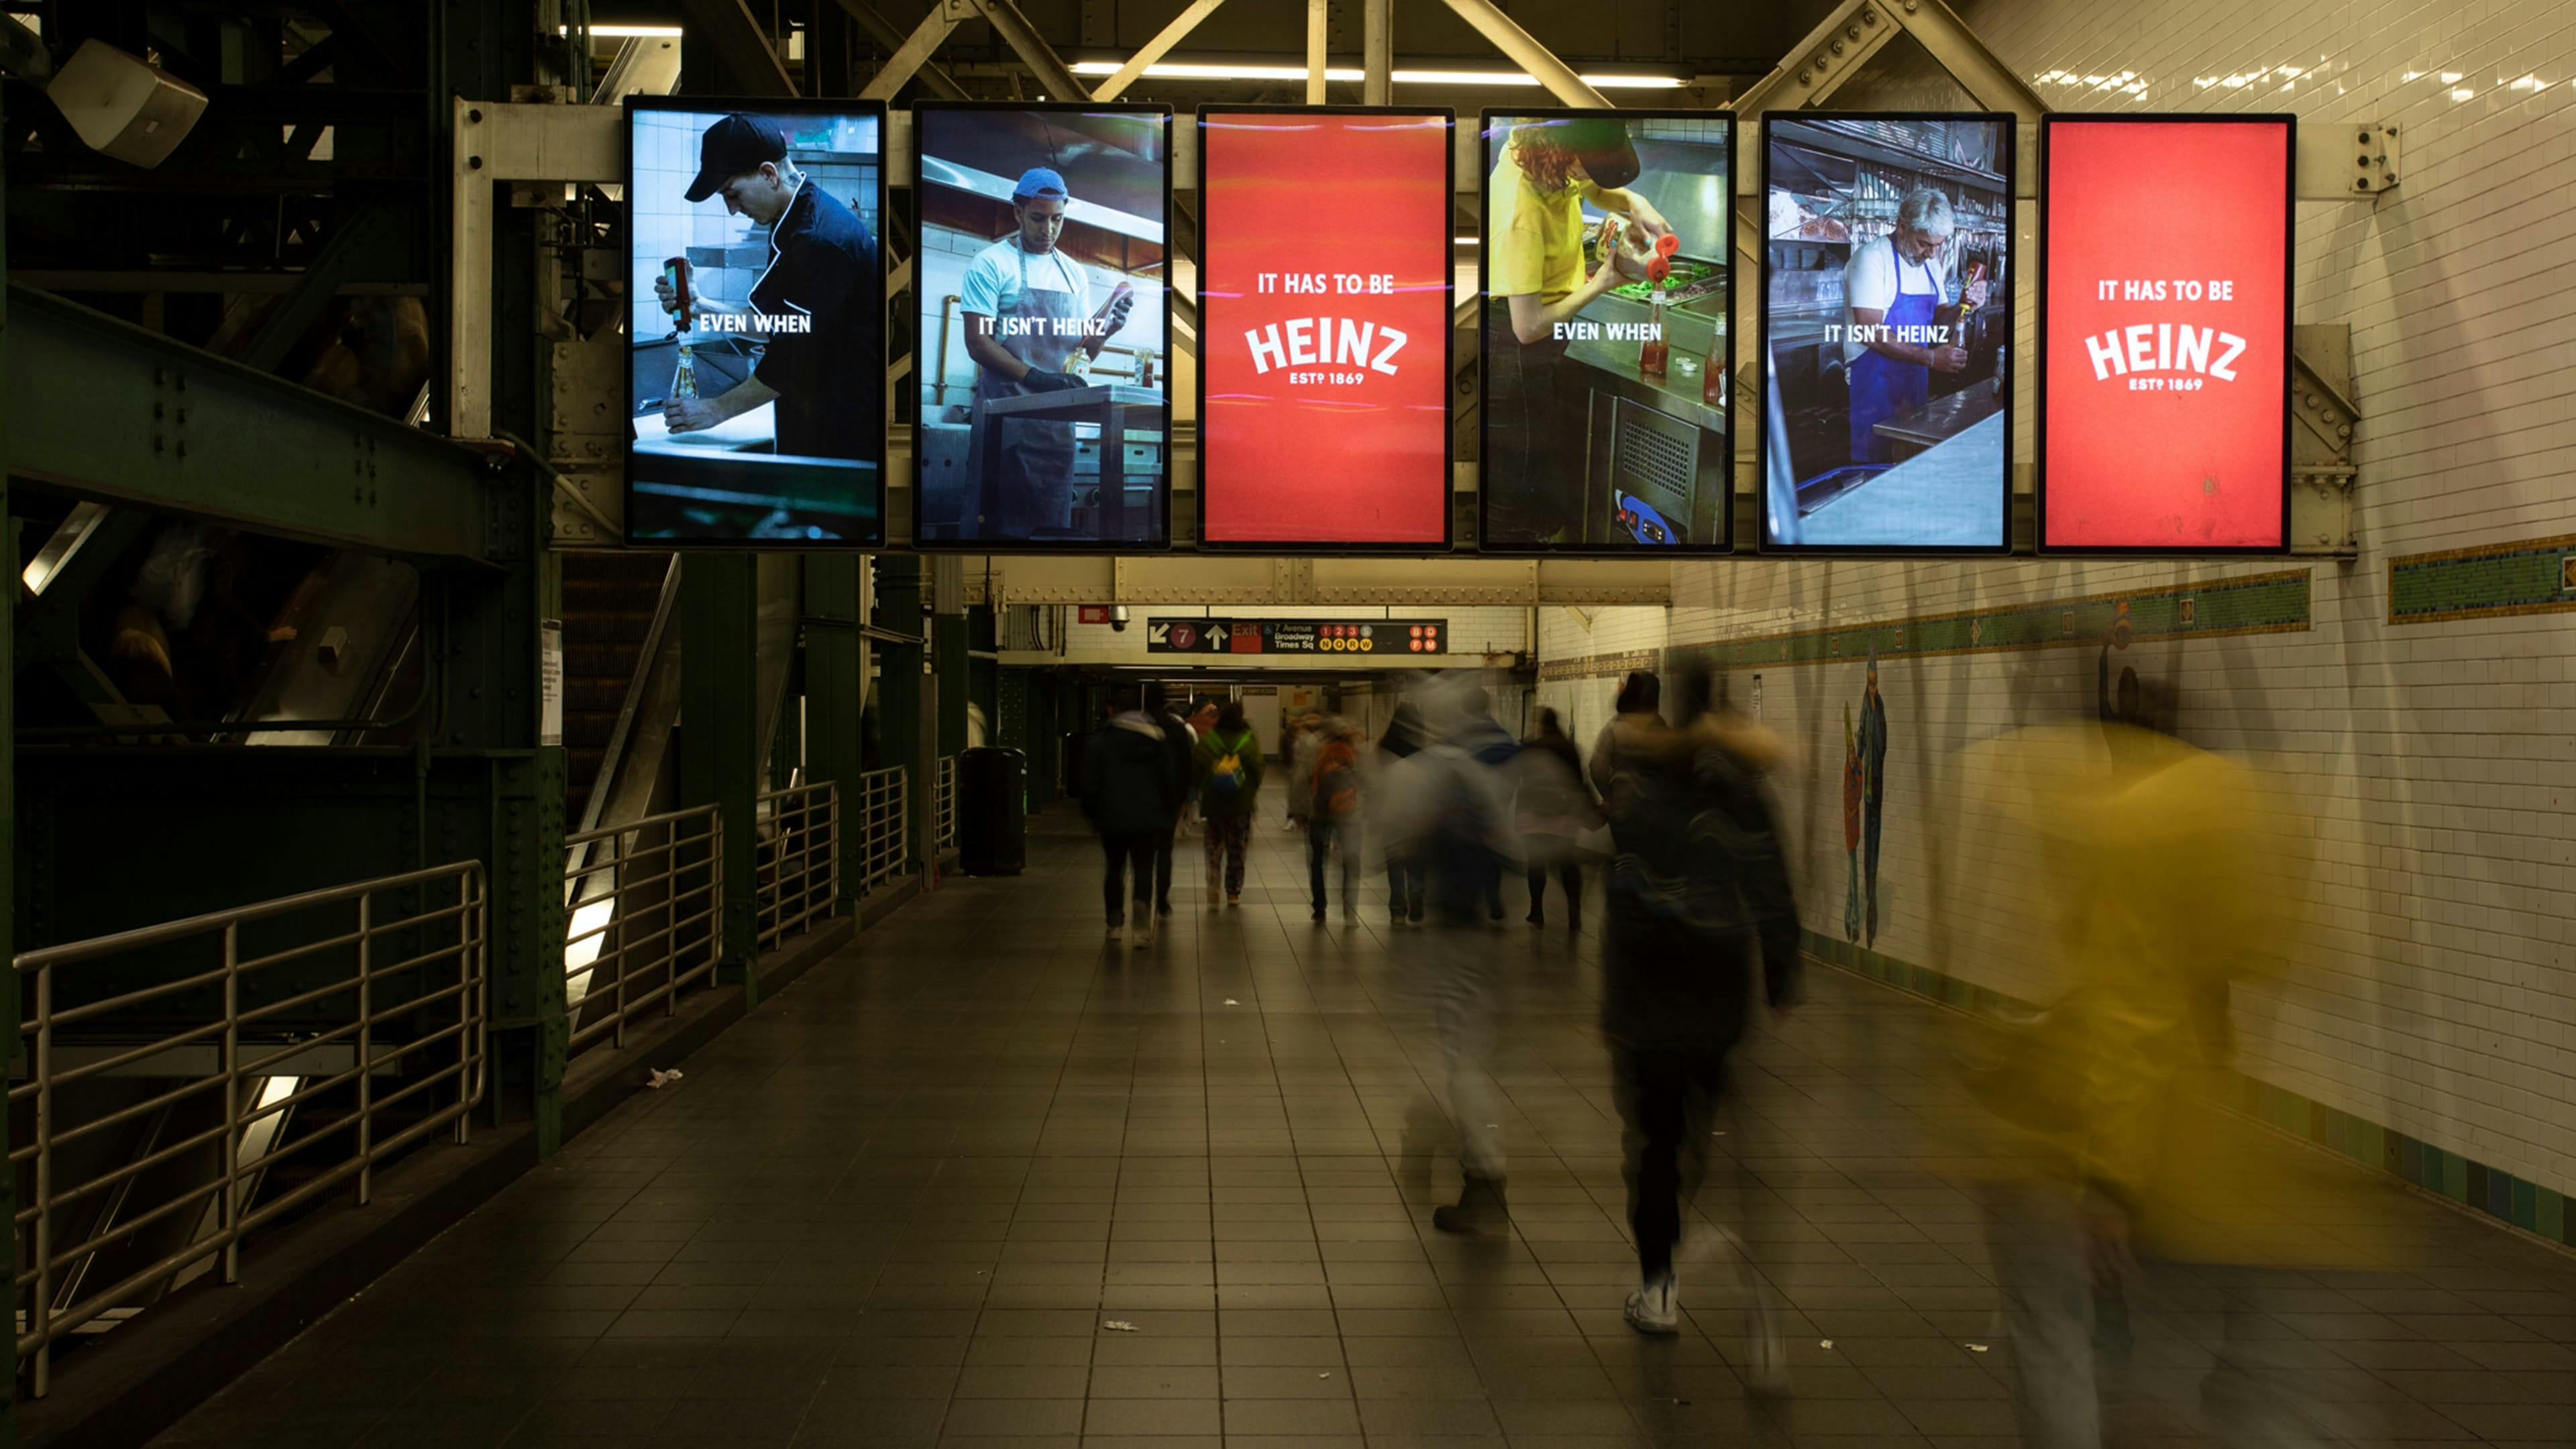 A subway station with several digital advertisements aligned overhead, each showing a different person pouring non-Heinz ketchup into Heinz ketchup bottles, with the tagline "Even when it isn't Heinz, it has to be Heinz."